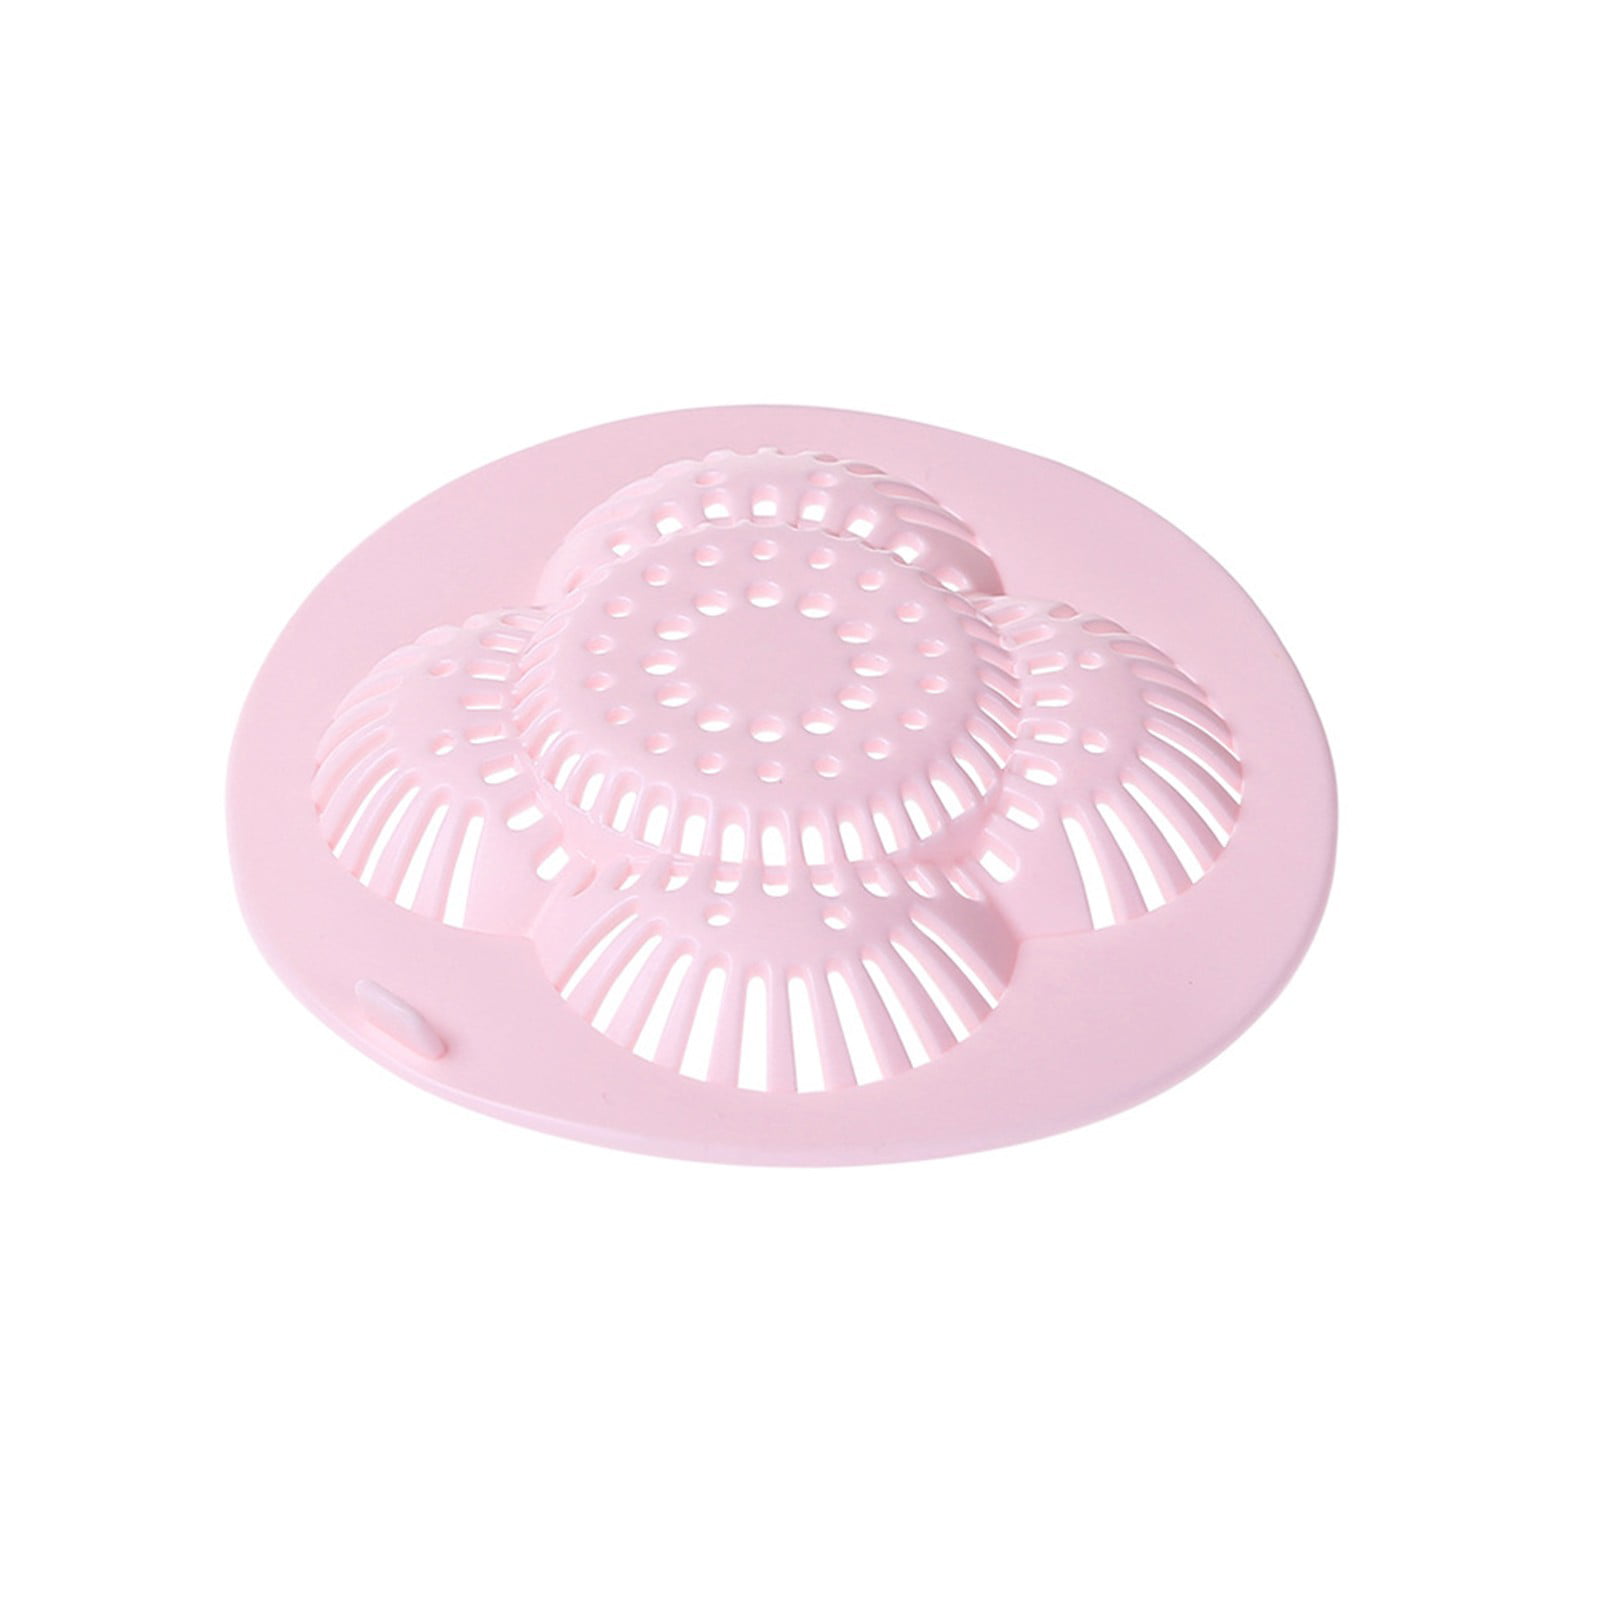 Silicone Home Bath Kitchen Sink Strainer Filter Net Floor Drain Stopper Cover CA 